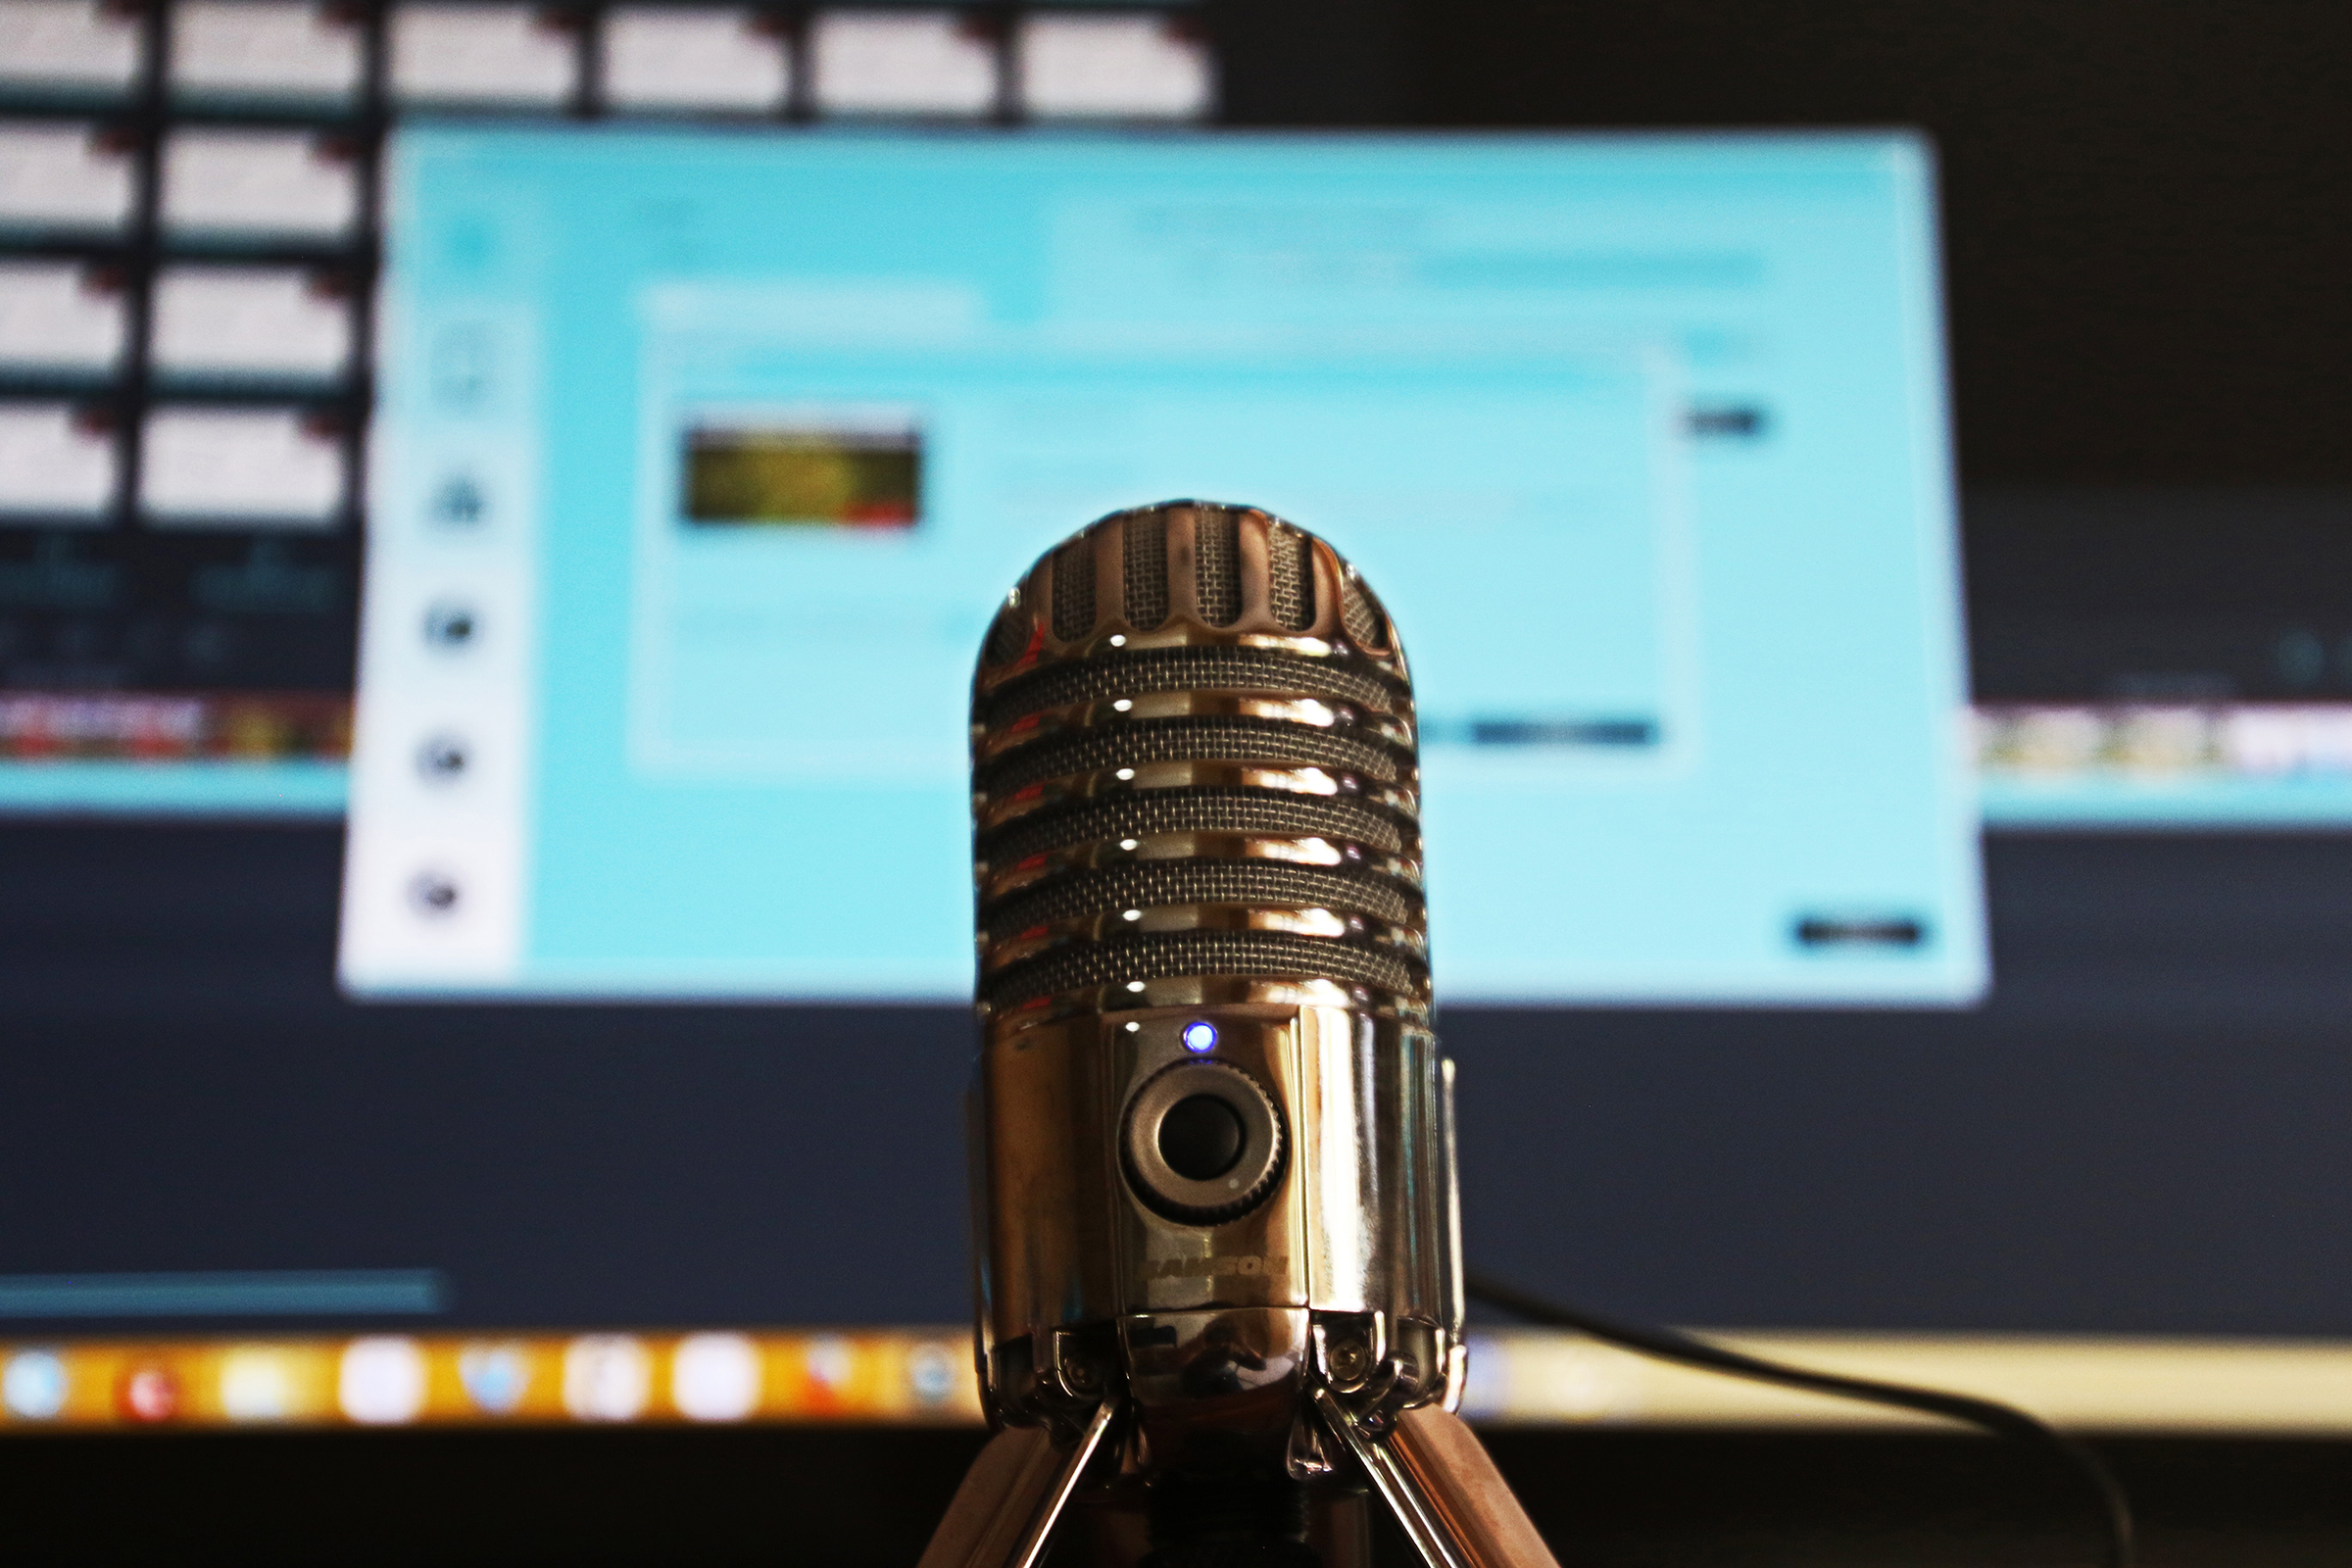 Microphone in front of a computer screen